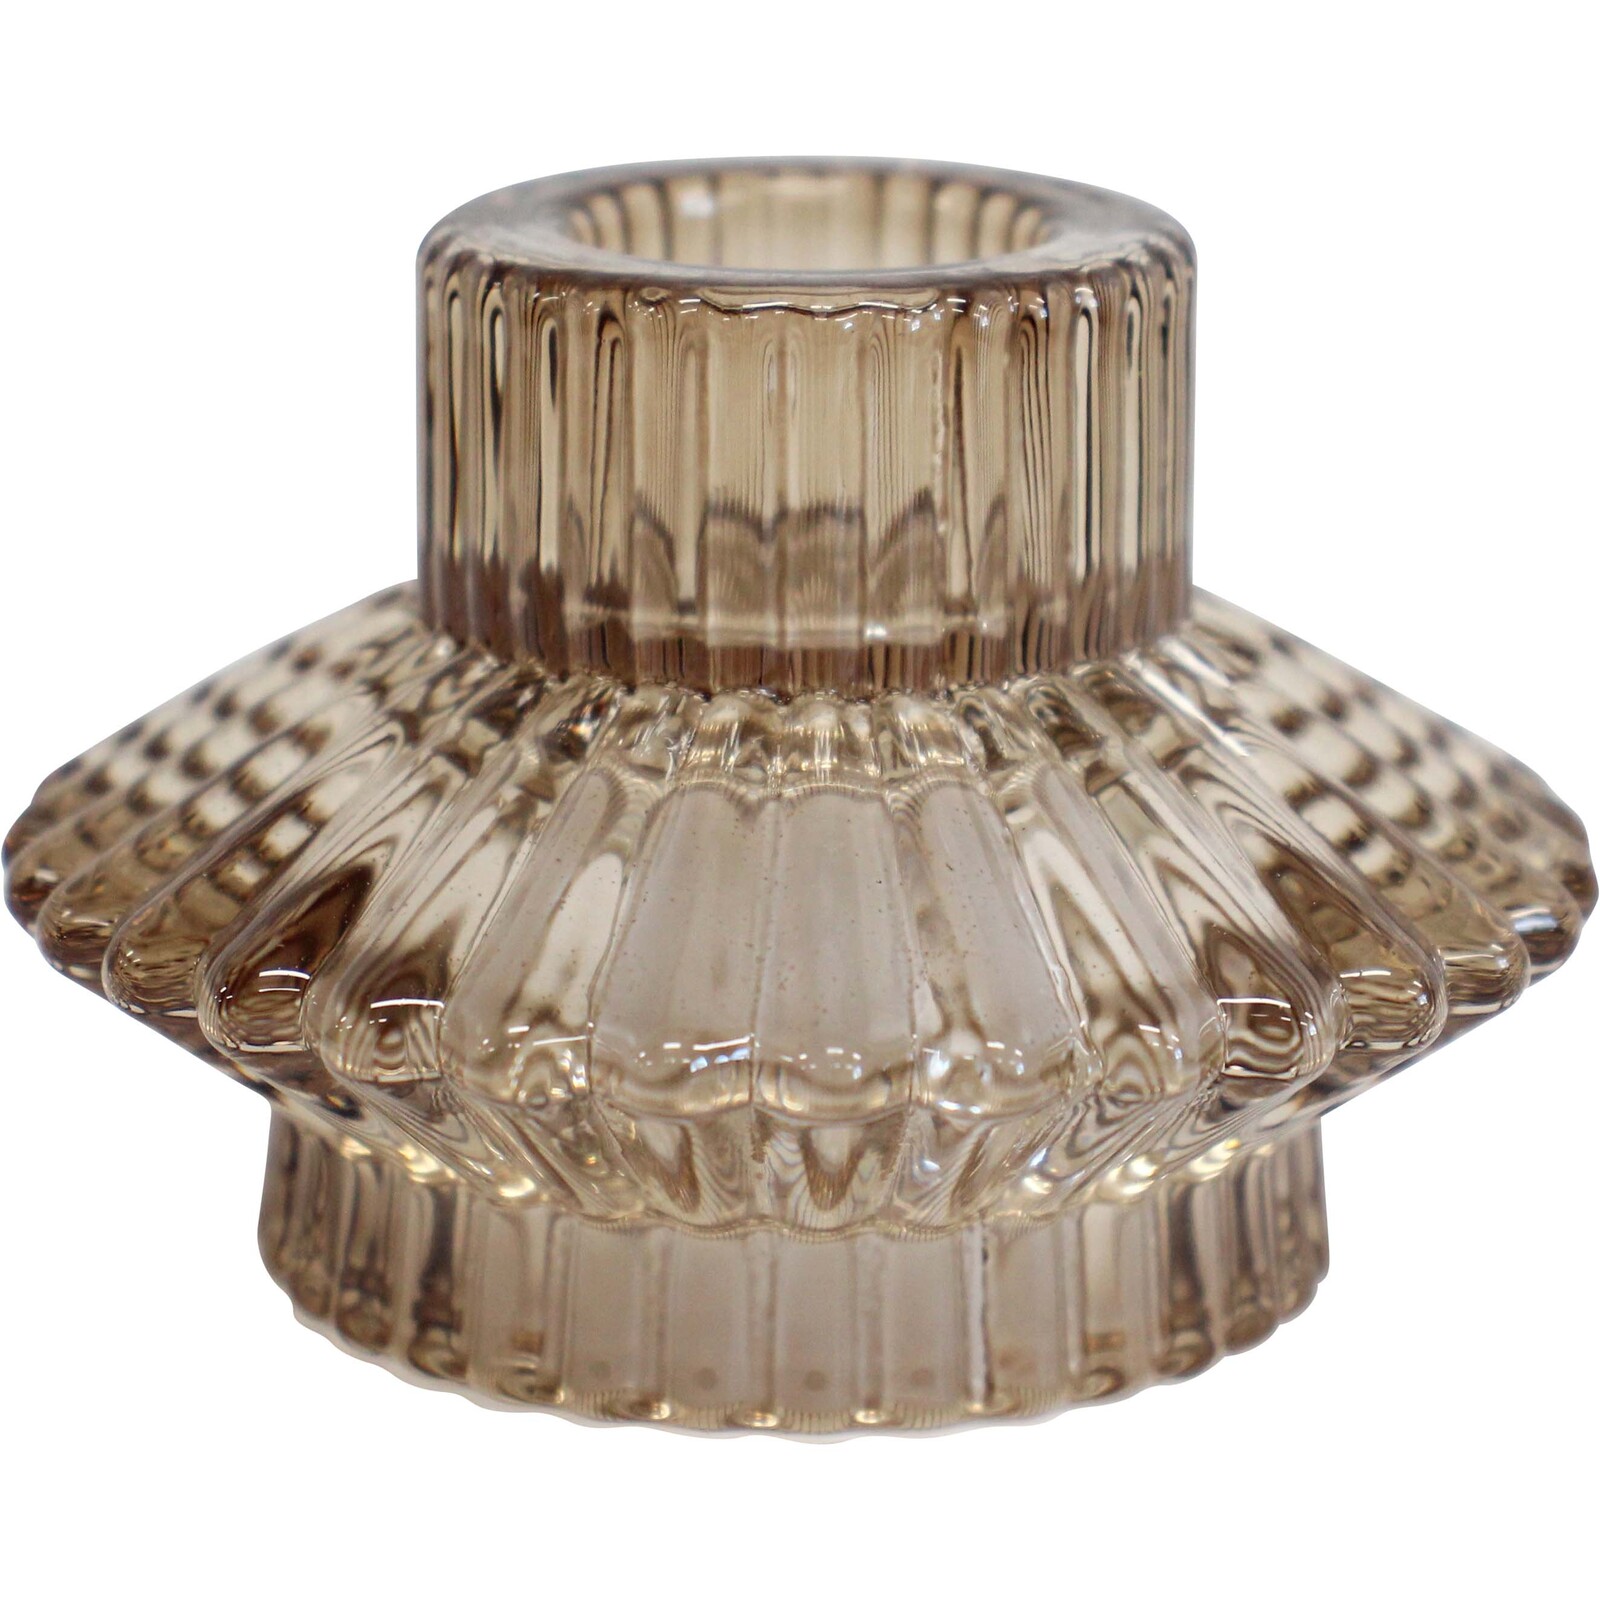 Double Sided Candle Holder Morroco